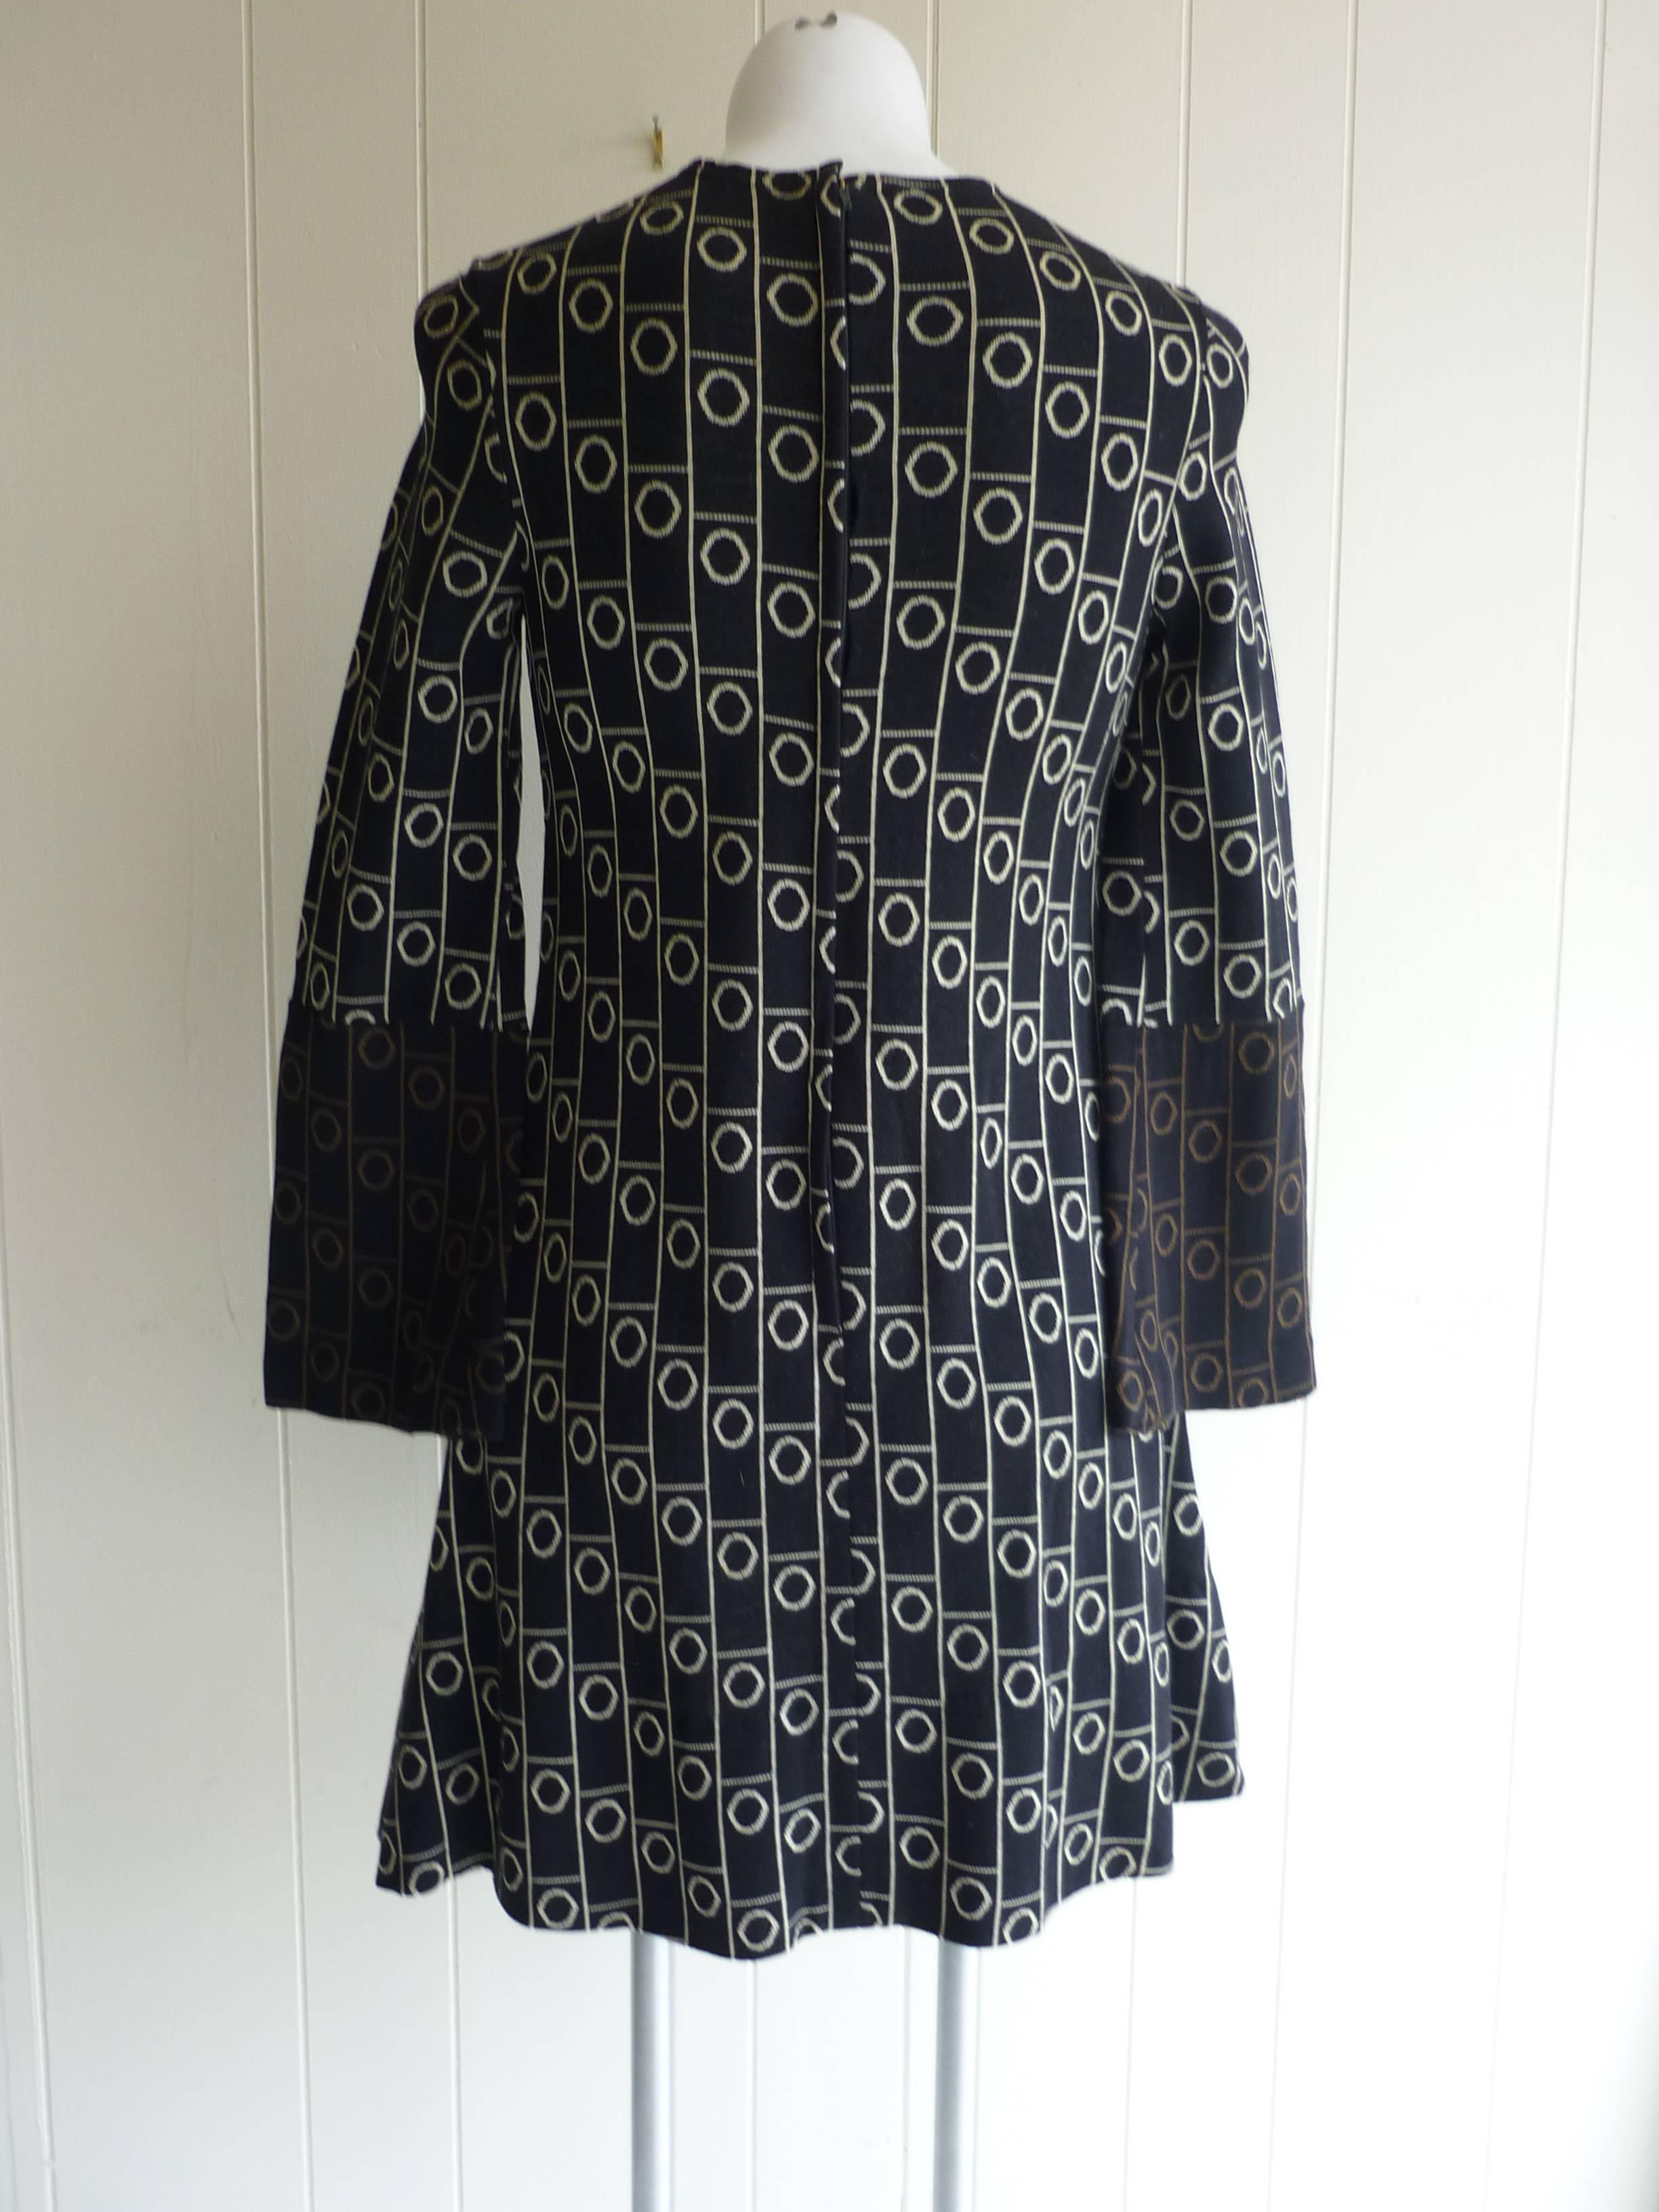 A collector dress in excellent condition, this wool dress has a black background with two-tone bell sleeves (black and beige and black and brown); a round collar, and makes you want to play tic tac toe.

The material is stretchy.

A beautiful